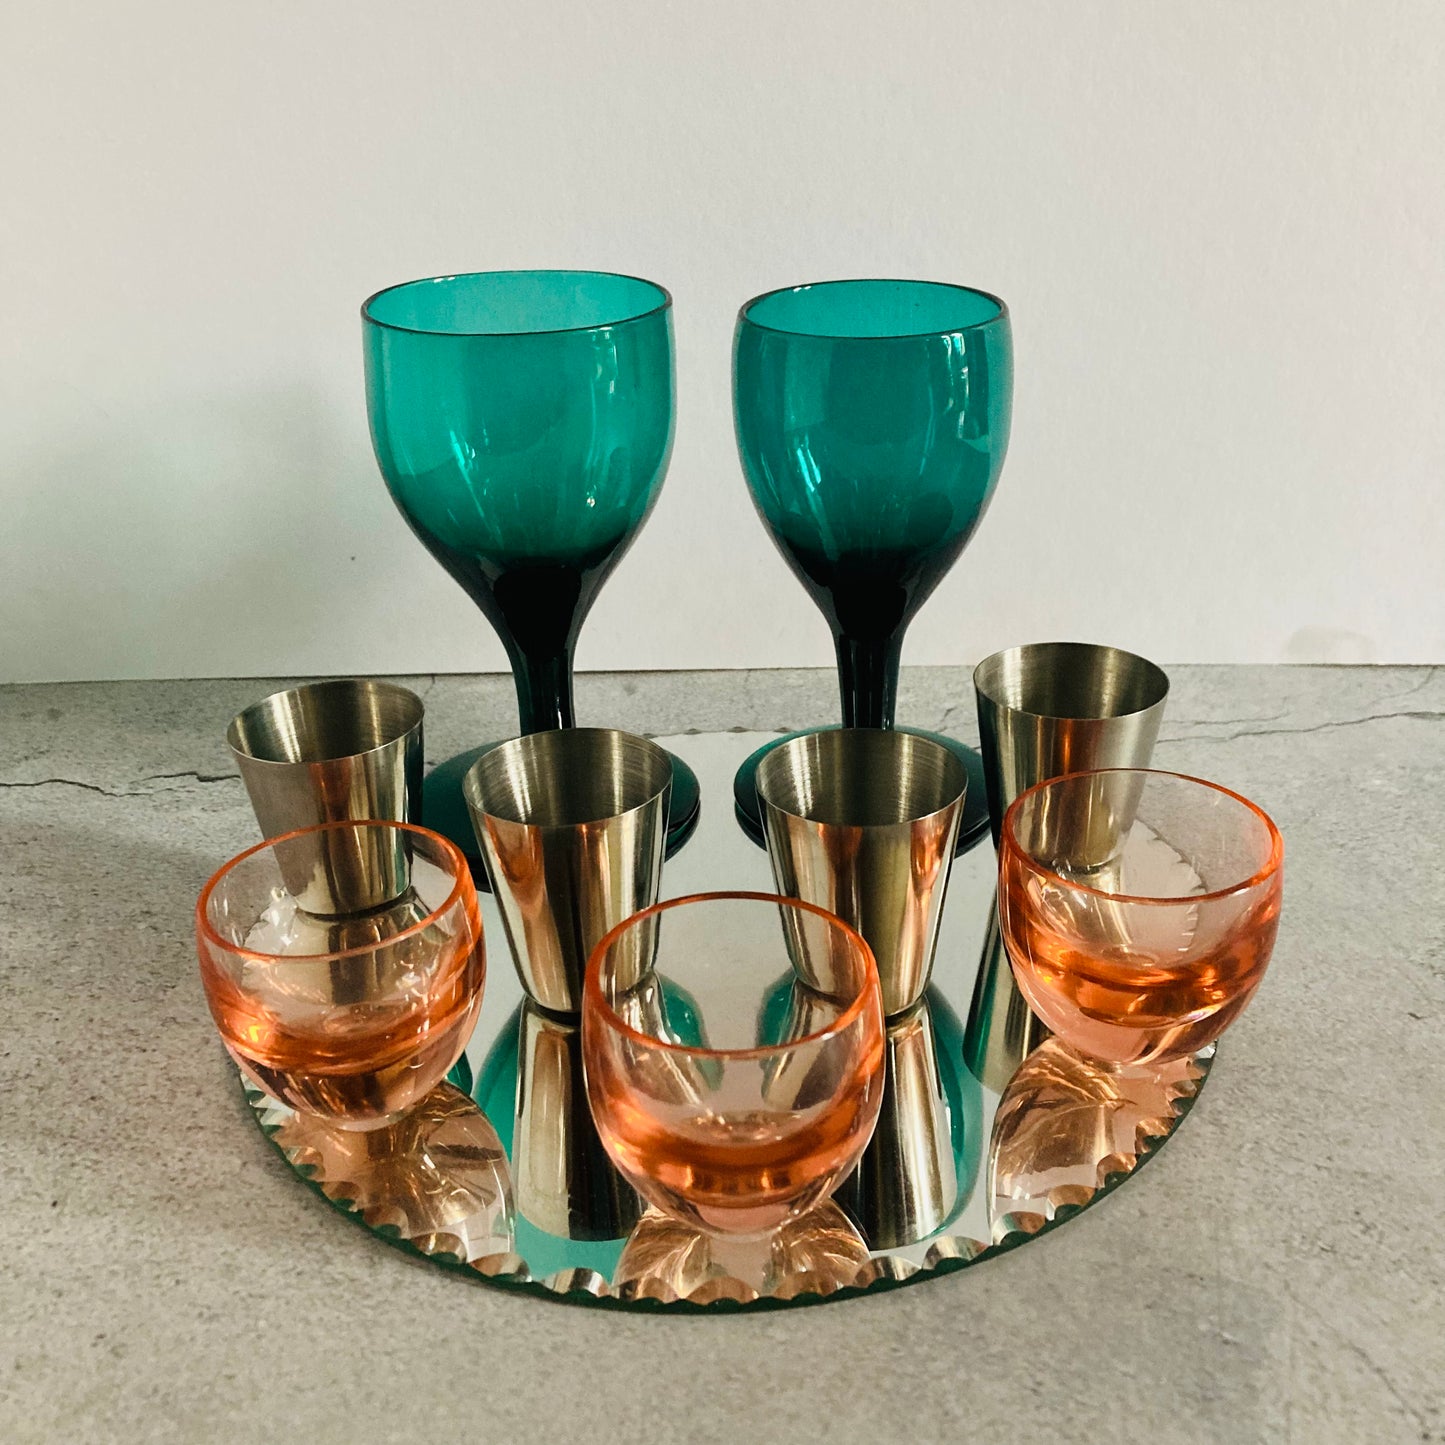 The Stripper Michael - Antique Hand Blown Turquoise Wine Glasses